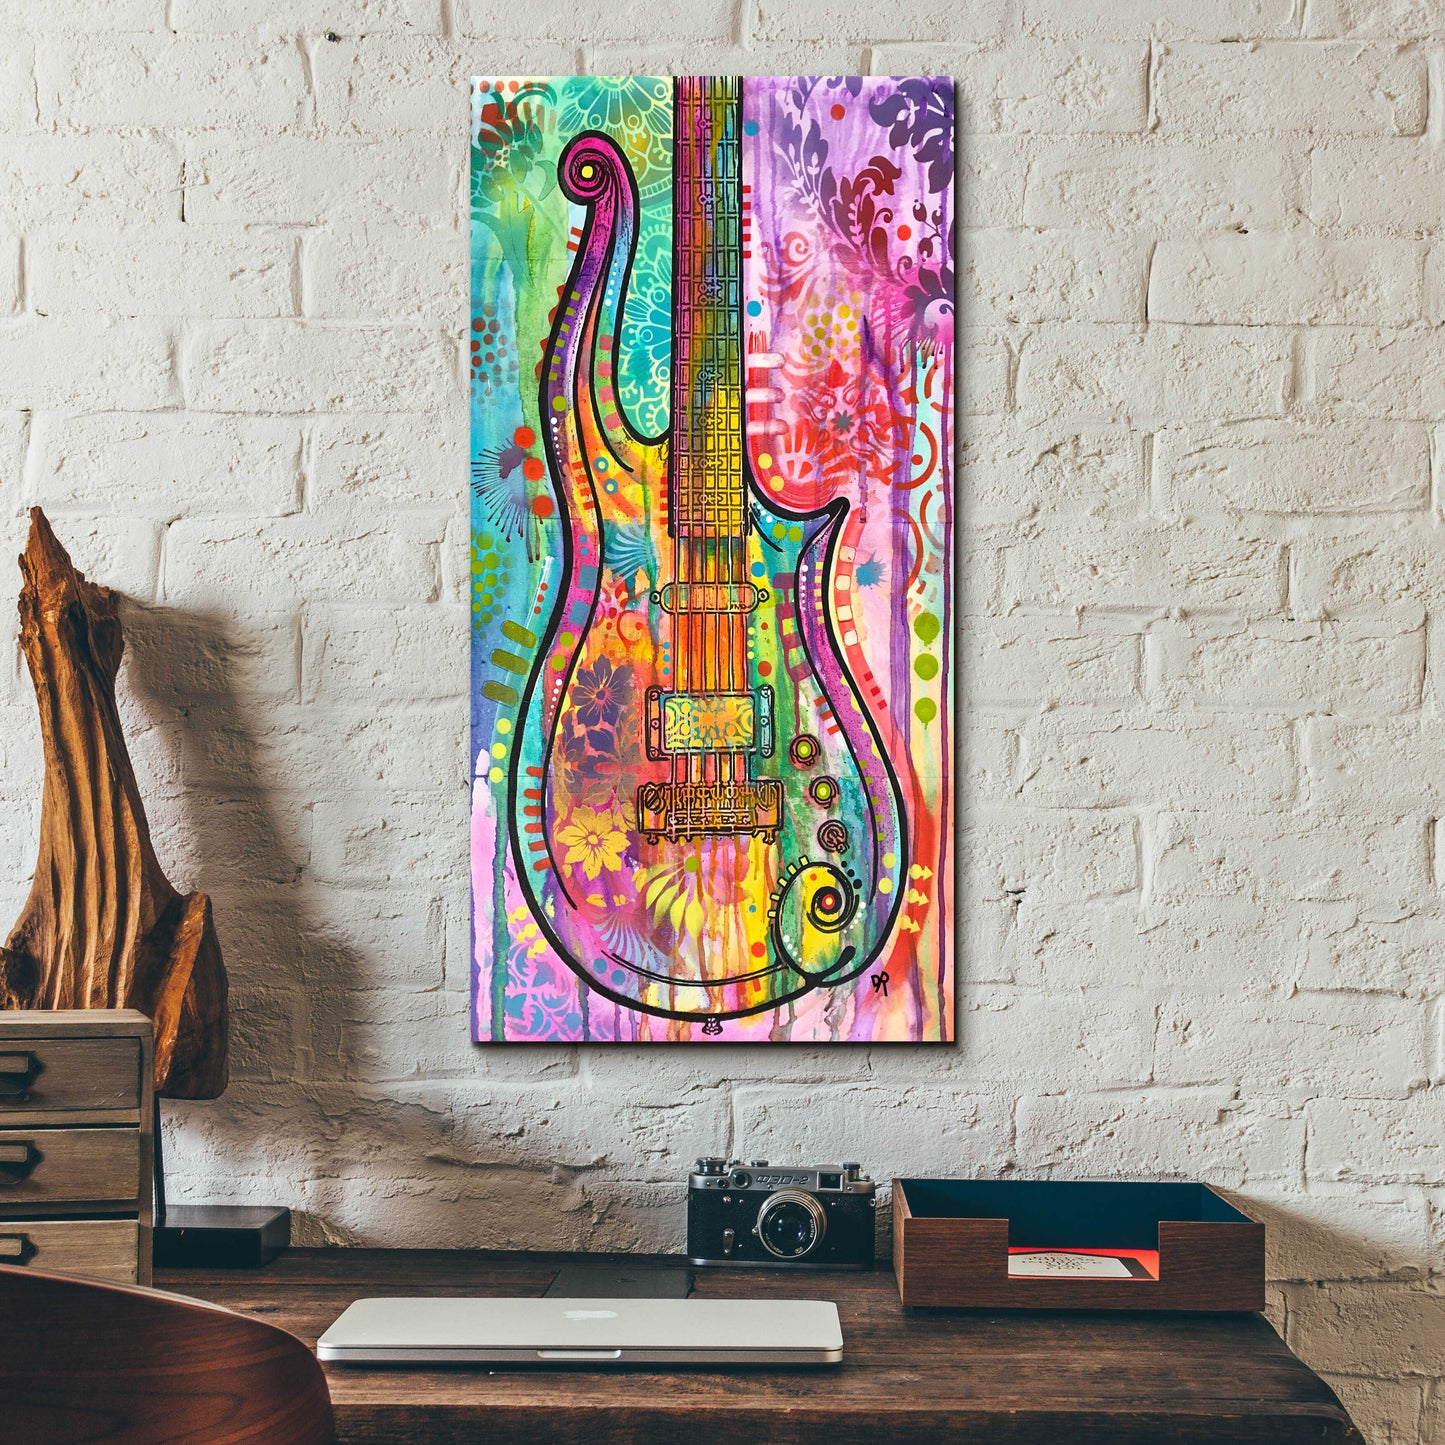 Epic Art 'Prince Cloud Guitar' by Dean Russo, Acrylic Glass Wall Art,12x24